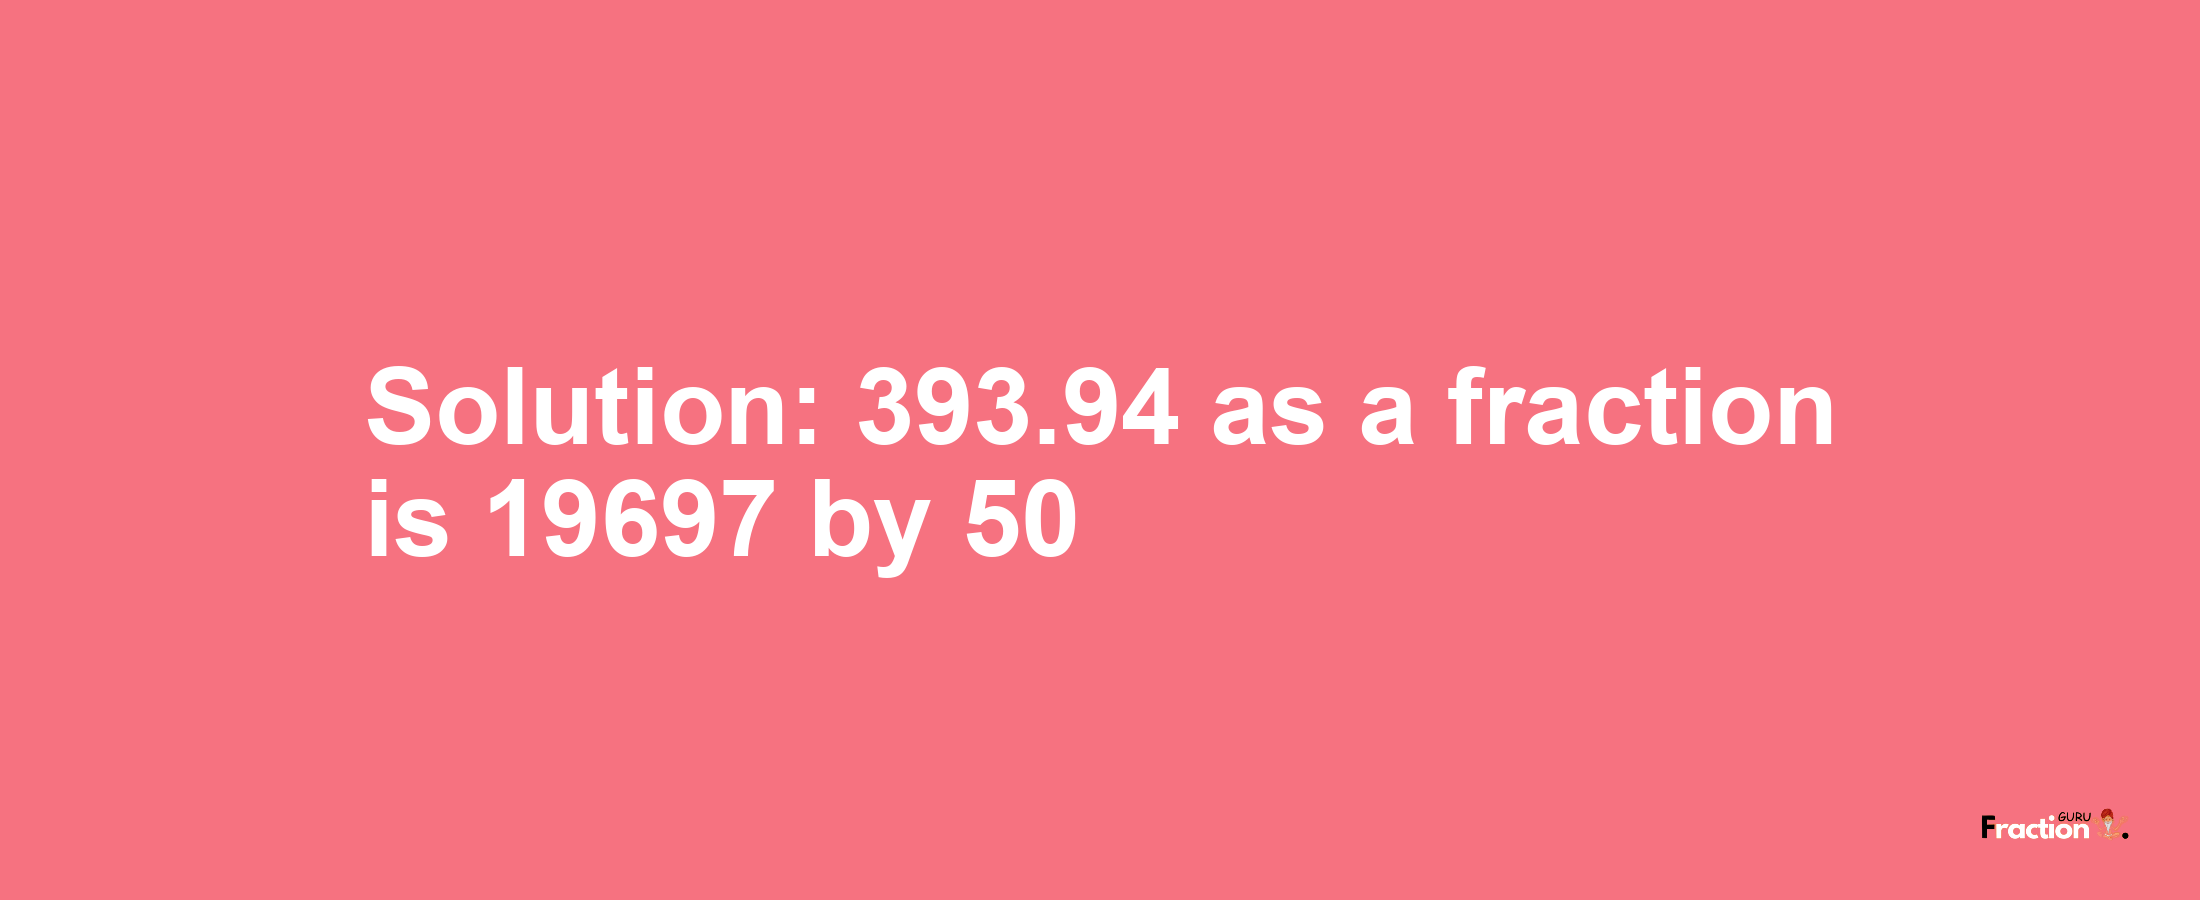 Solution:393.94 as a fraction is 19697/50